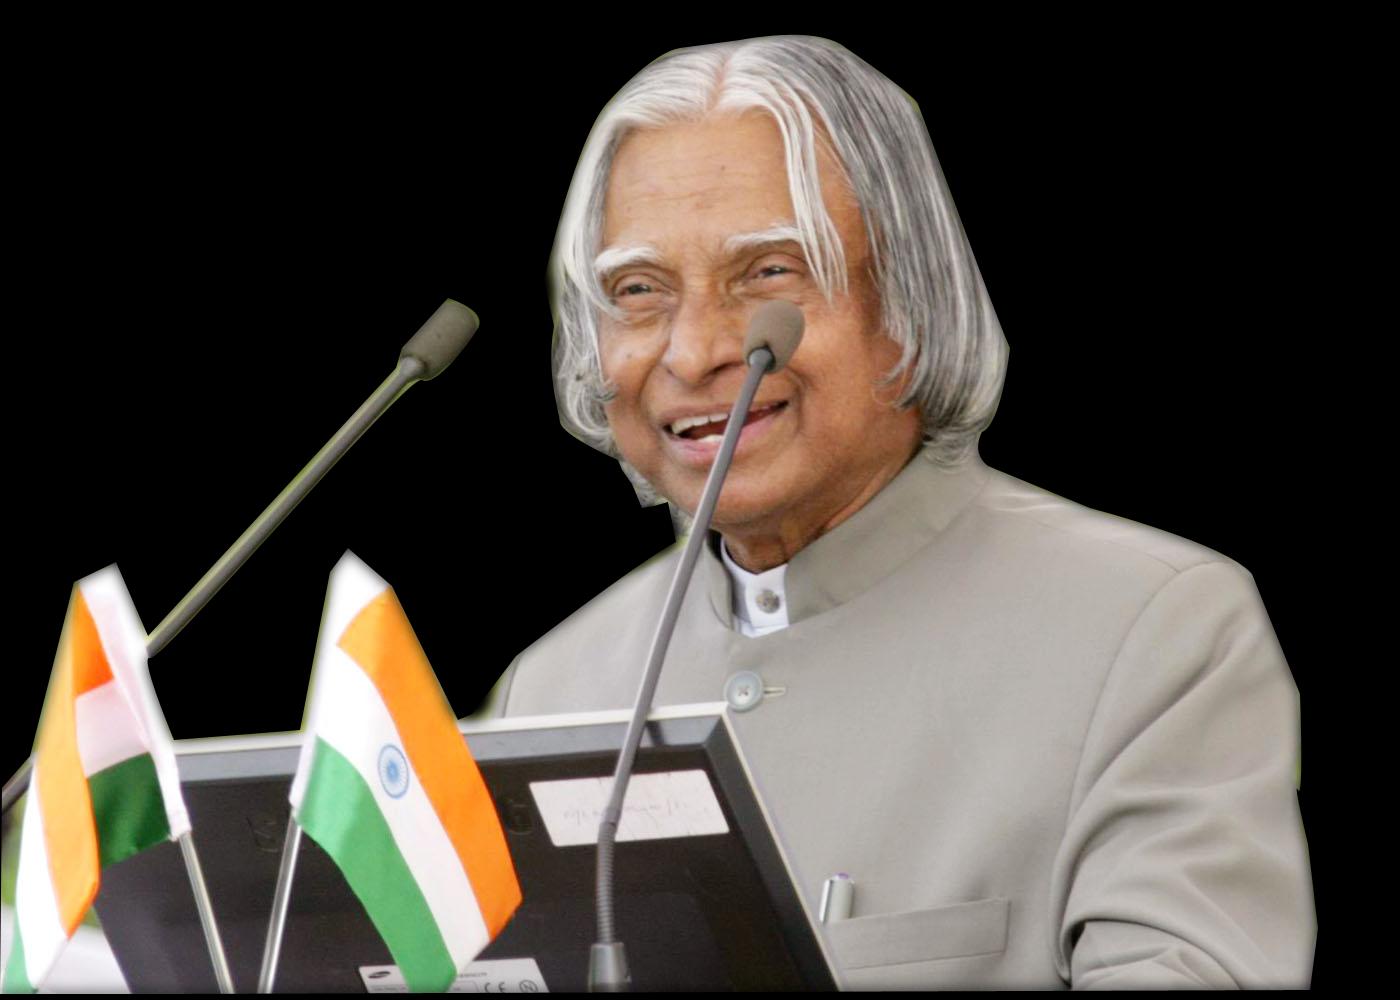 Abdul Kalam Live Wallpaper for Android